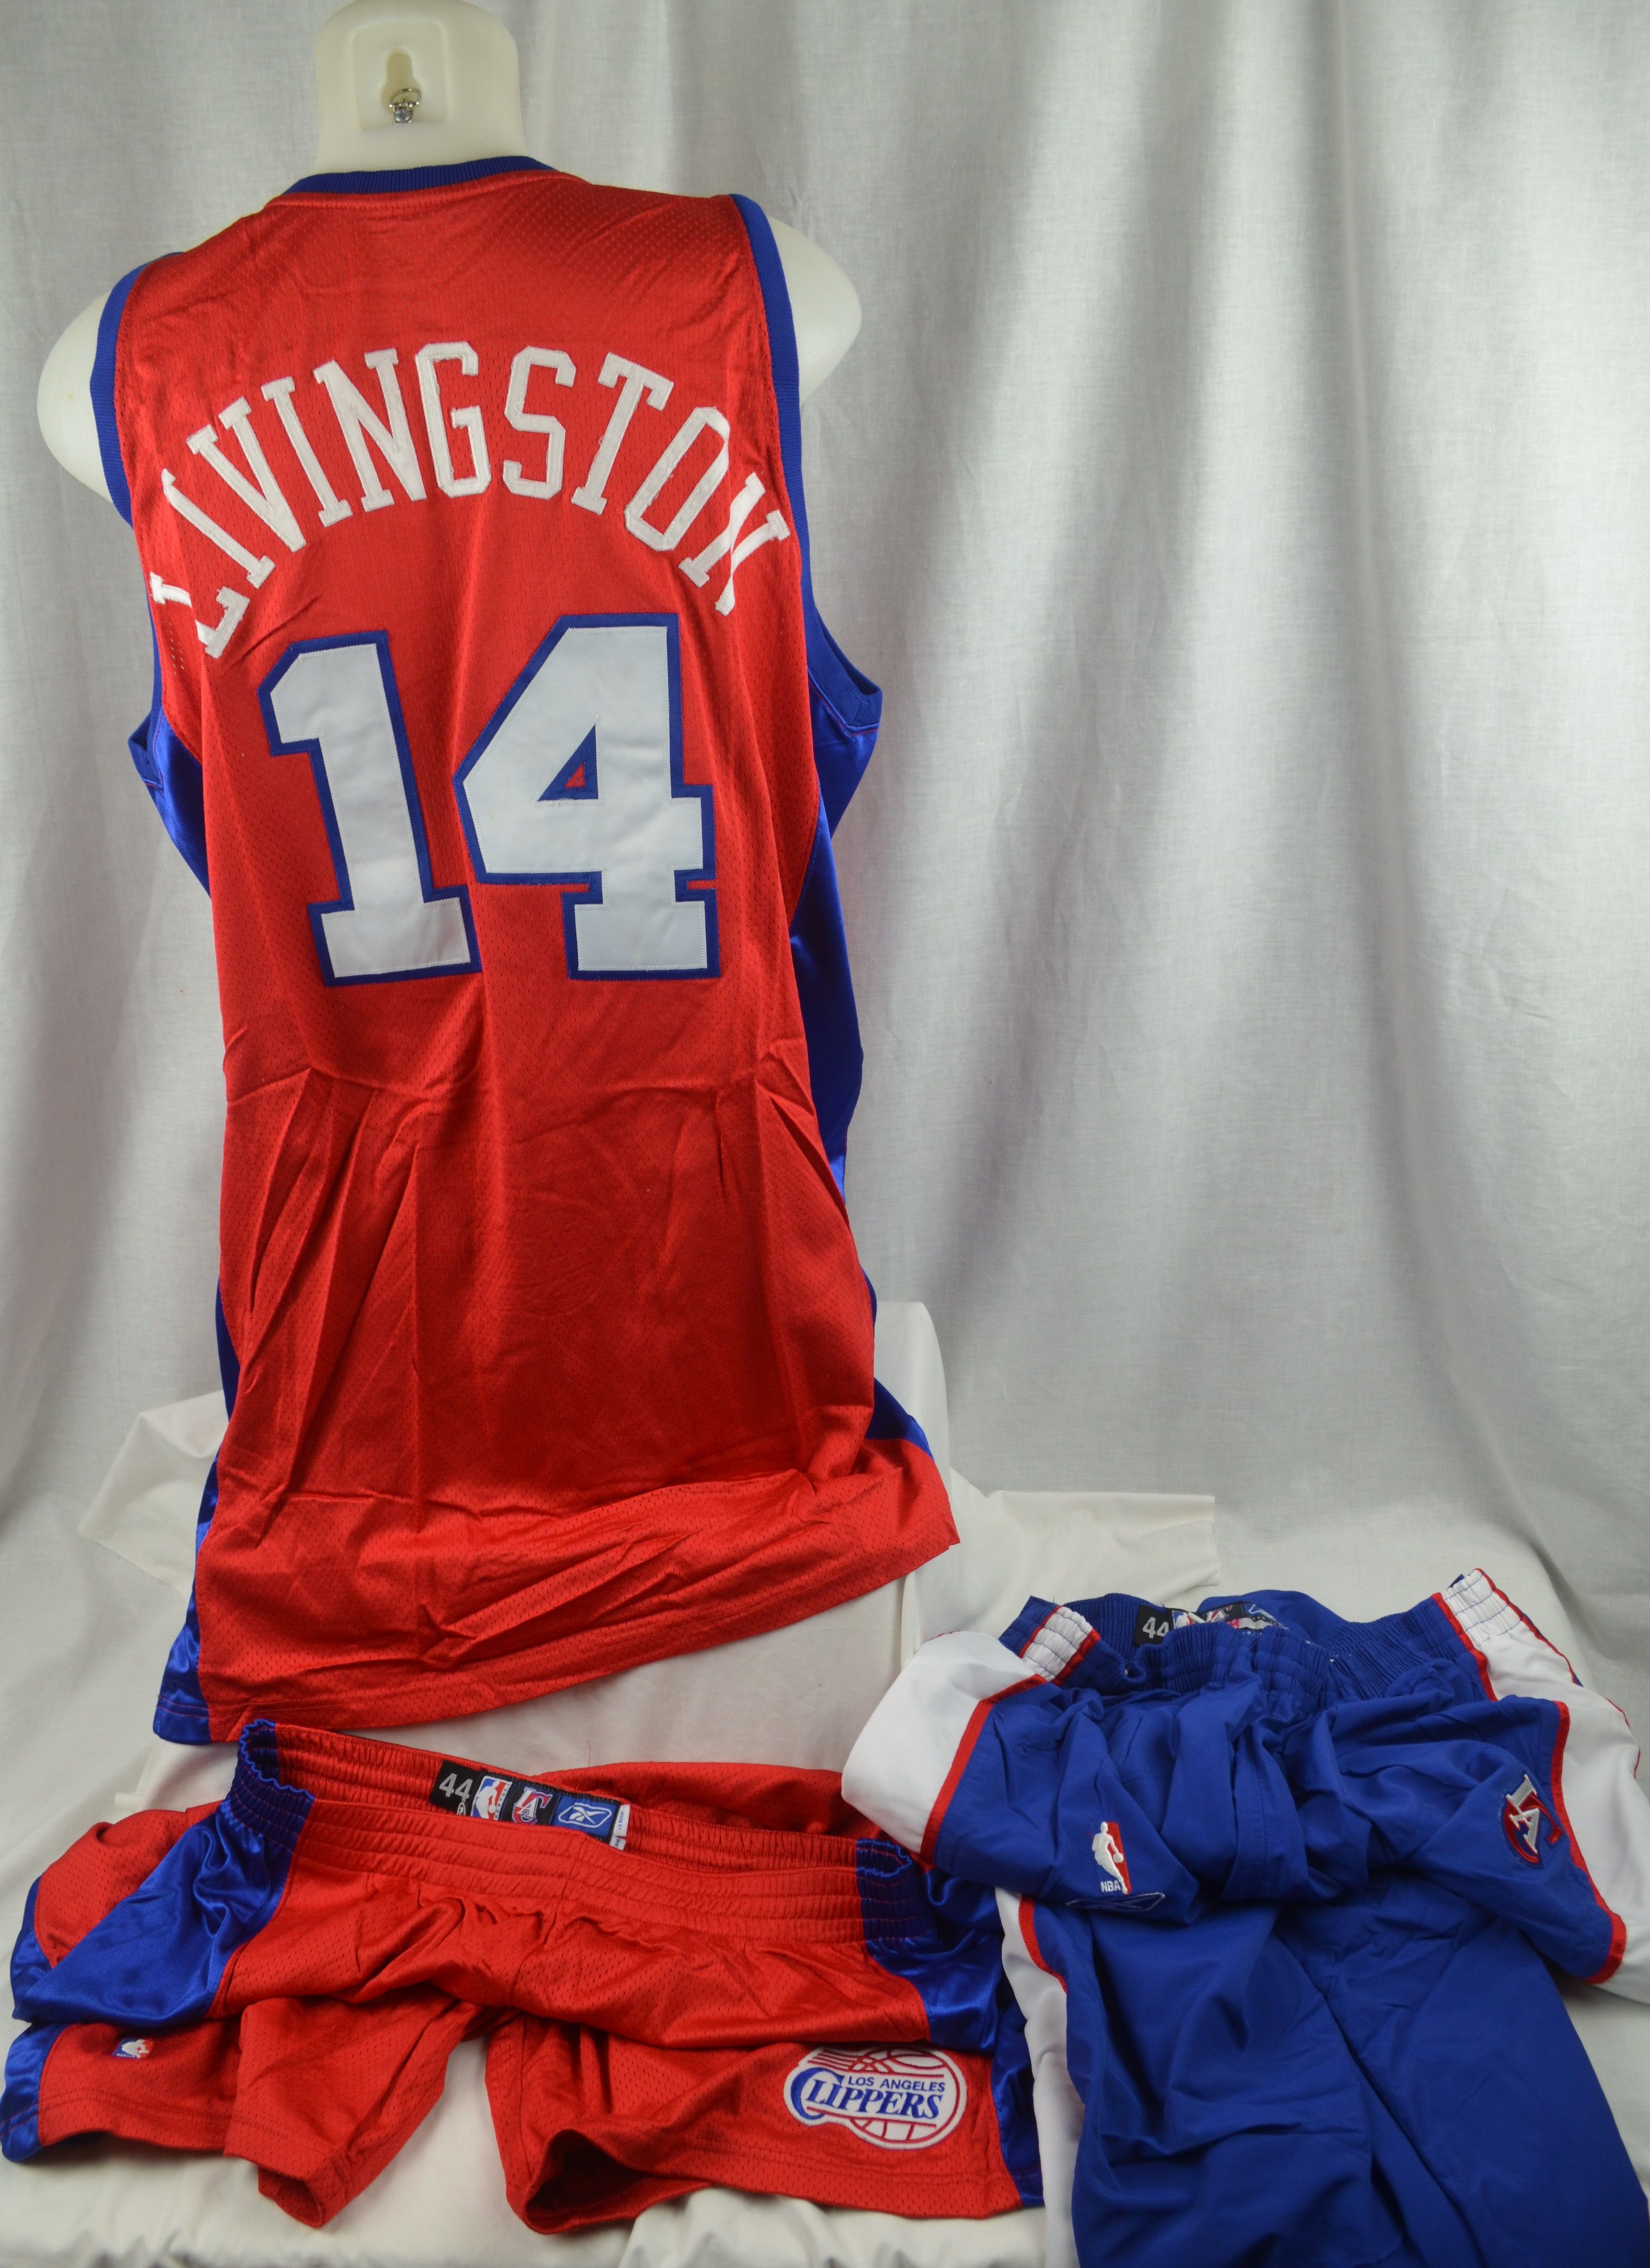 shaun livingston clippers jersey